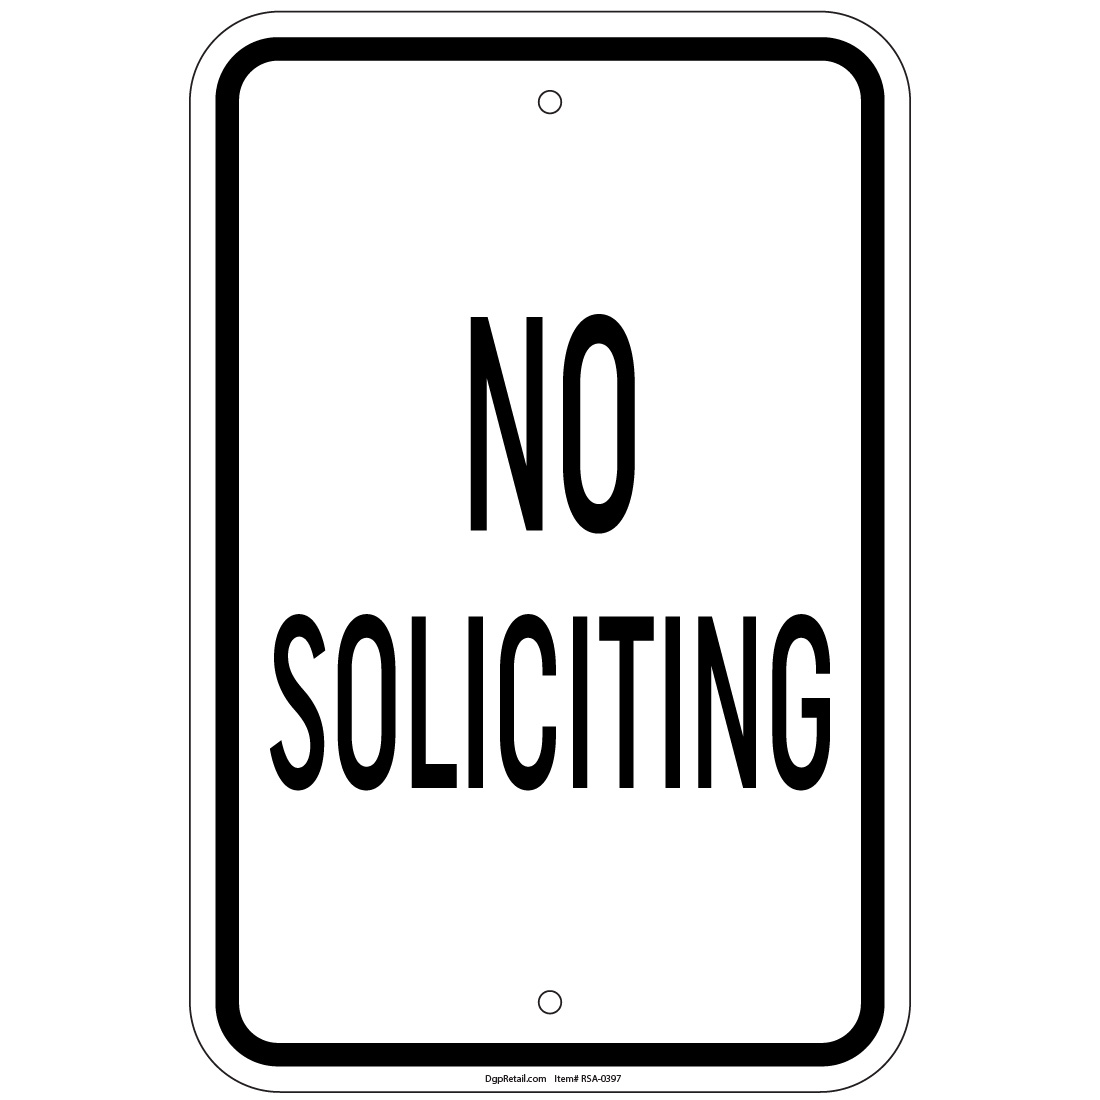 No Soliciting Sign 8"x12" aluminum Signs Retail Store 767261444409 eBay